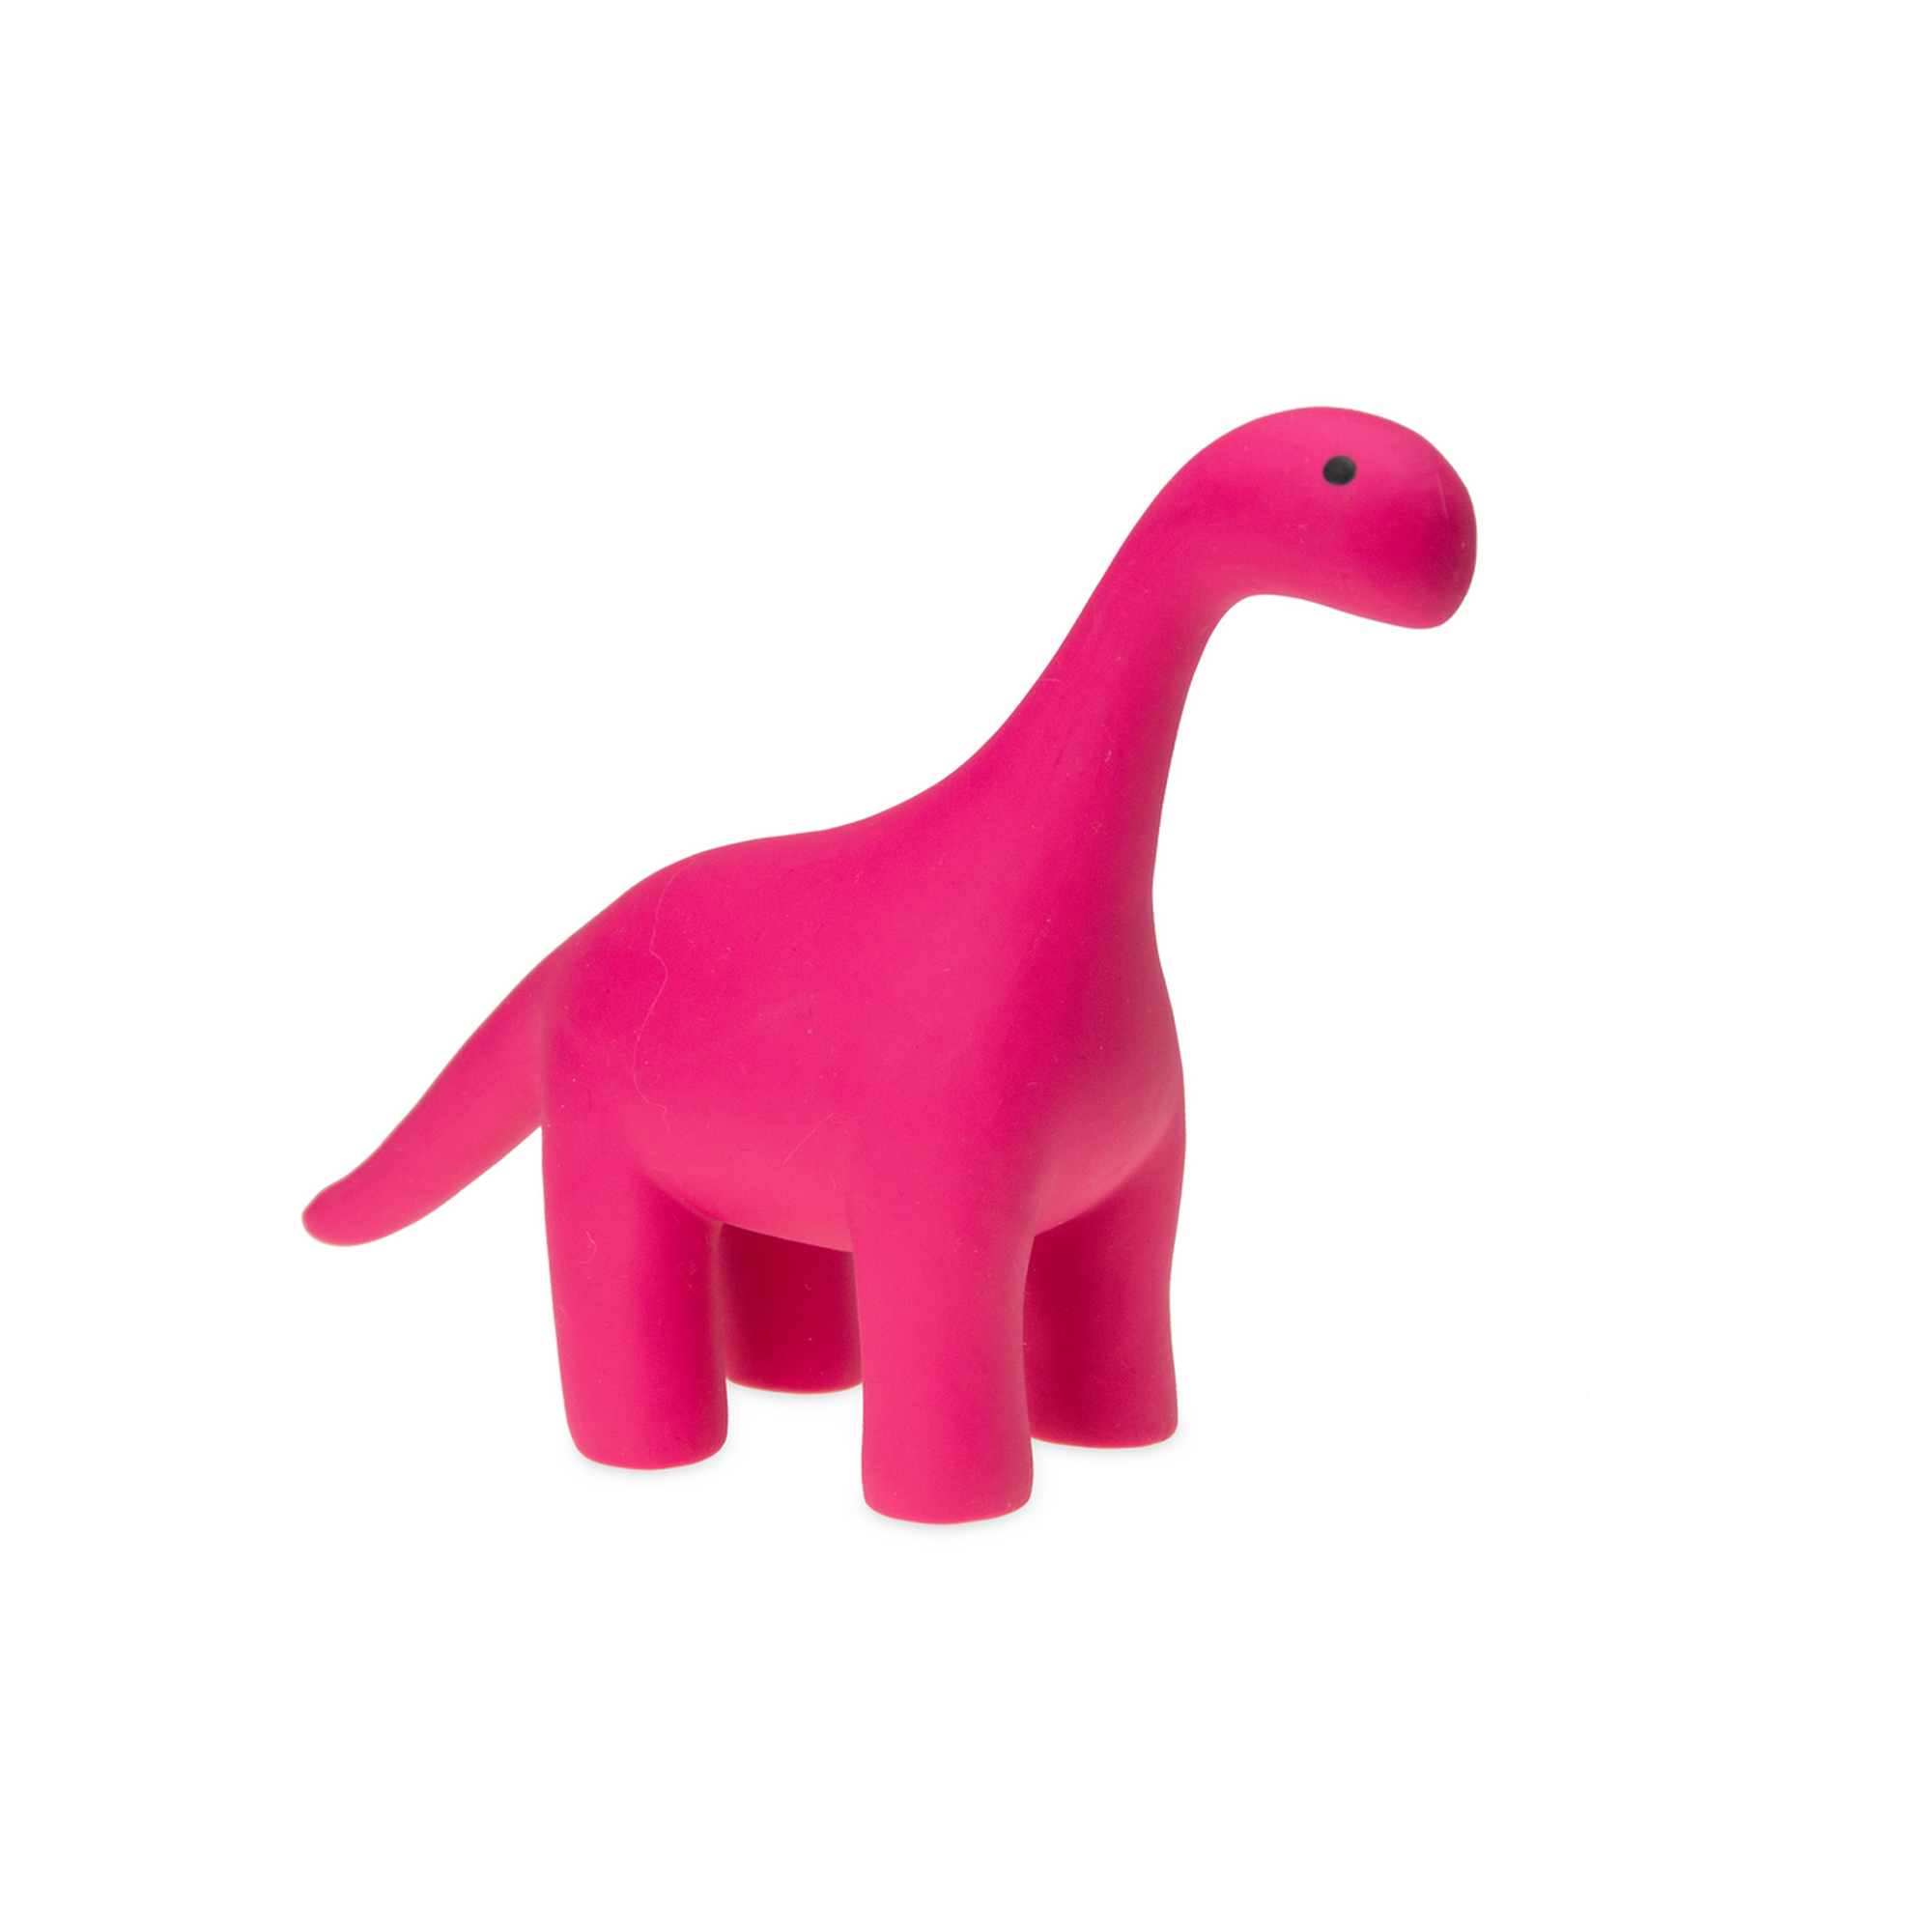 Apportierspielzeug Dino pink Latex 21 cm + product picture